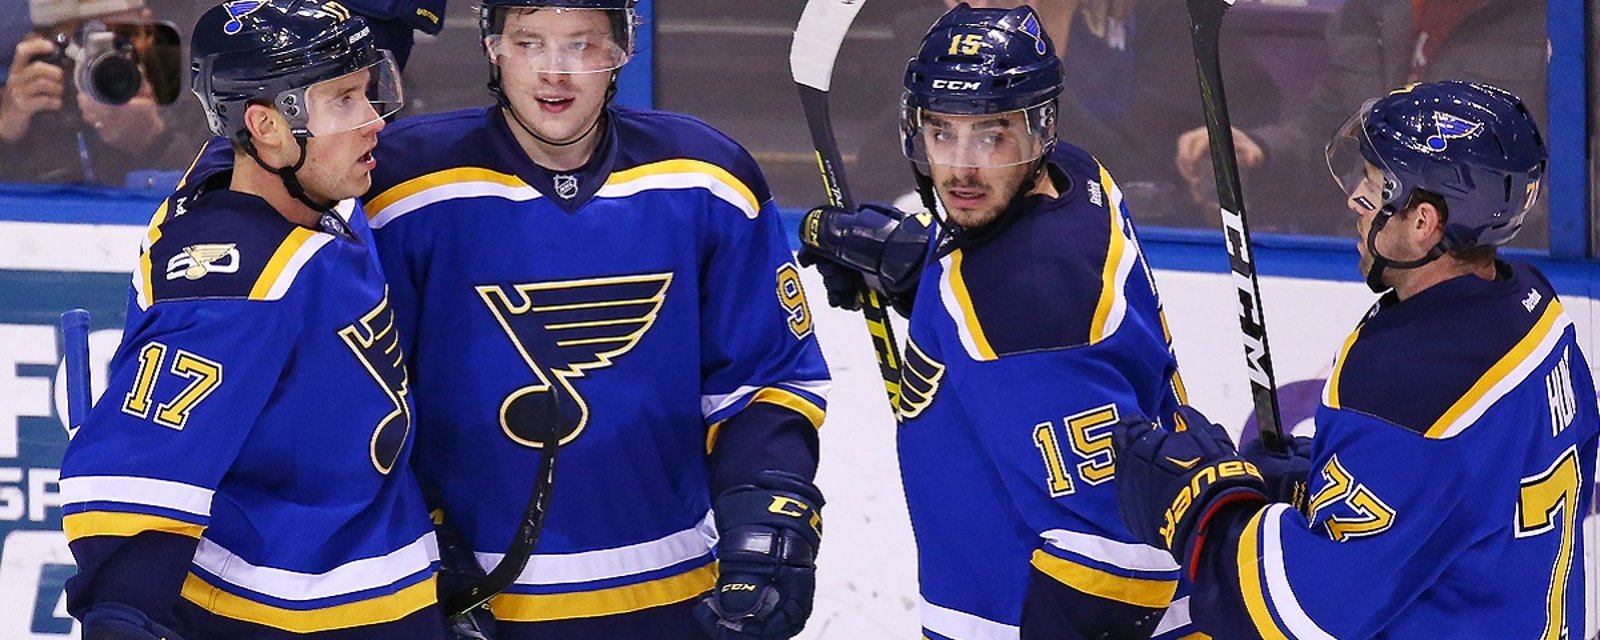 Blues lose young former first round pick for the entire season.